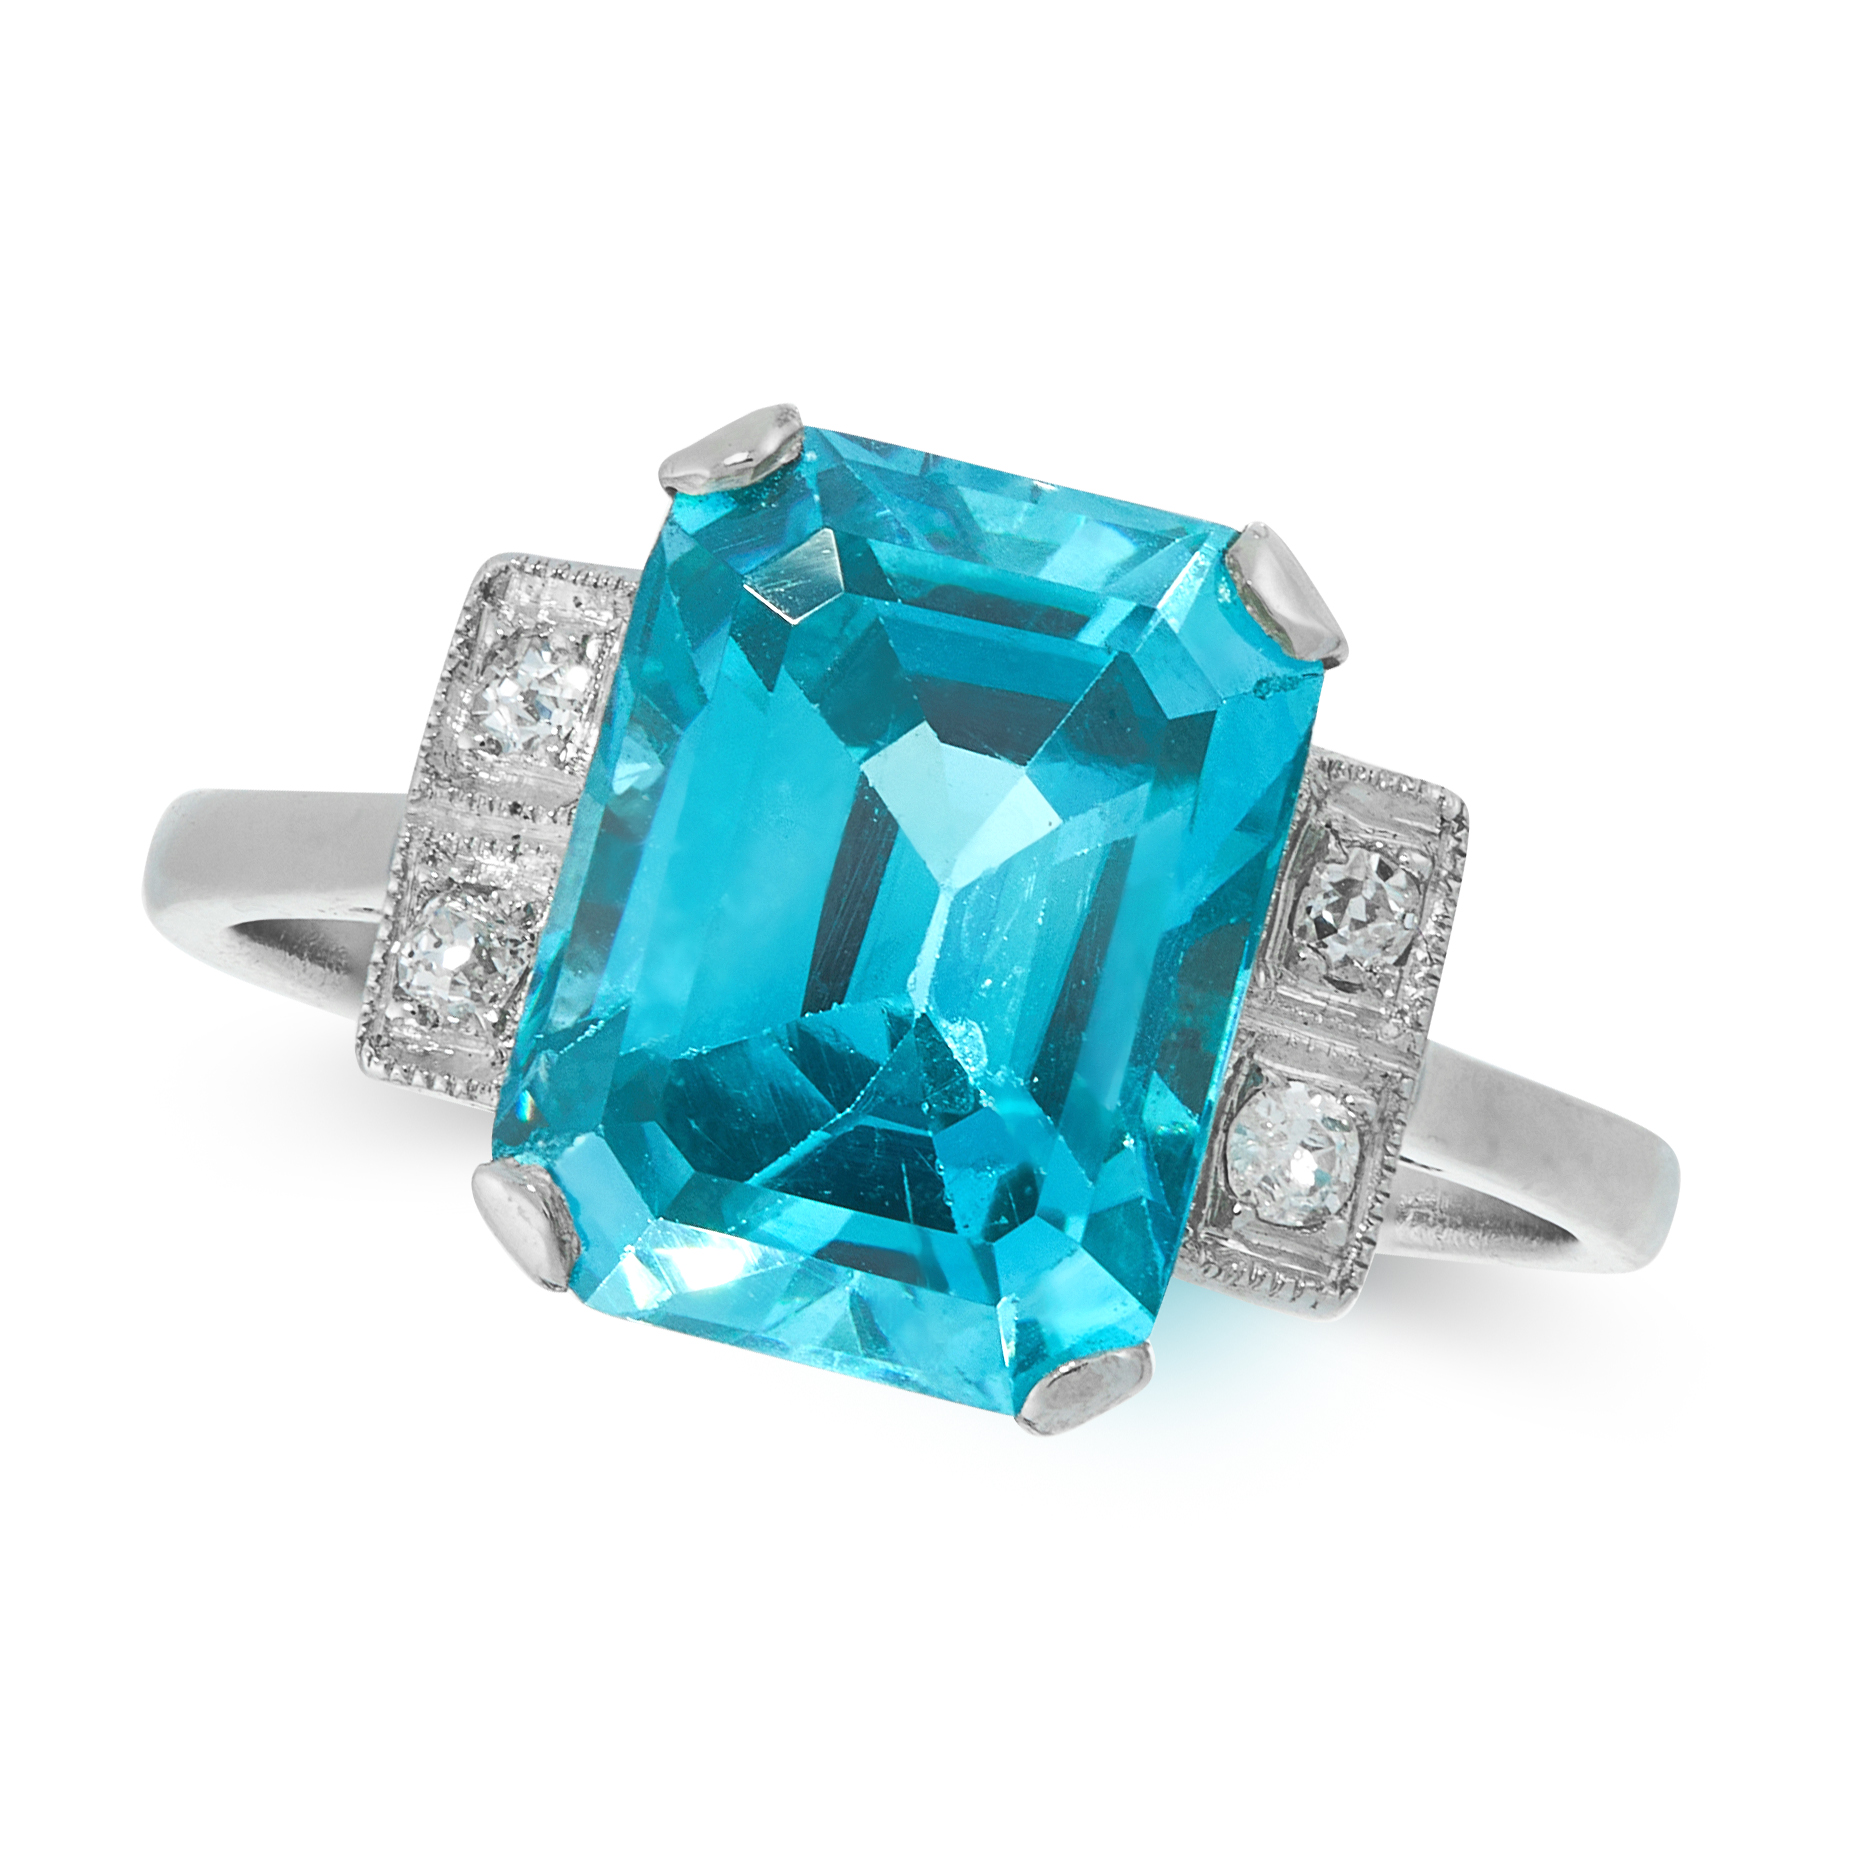 A BLUE ZIRCON AND DIAMOND DRESS RING, EARLY 20TH CENTURY in platinum, set with an emerald cut blue